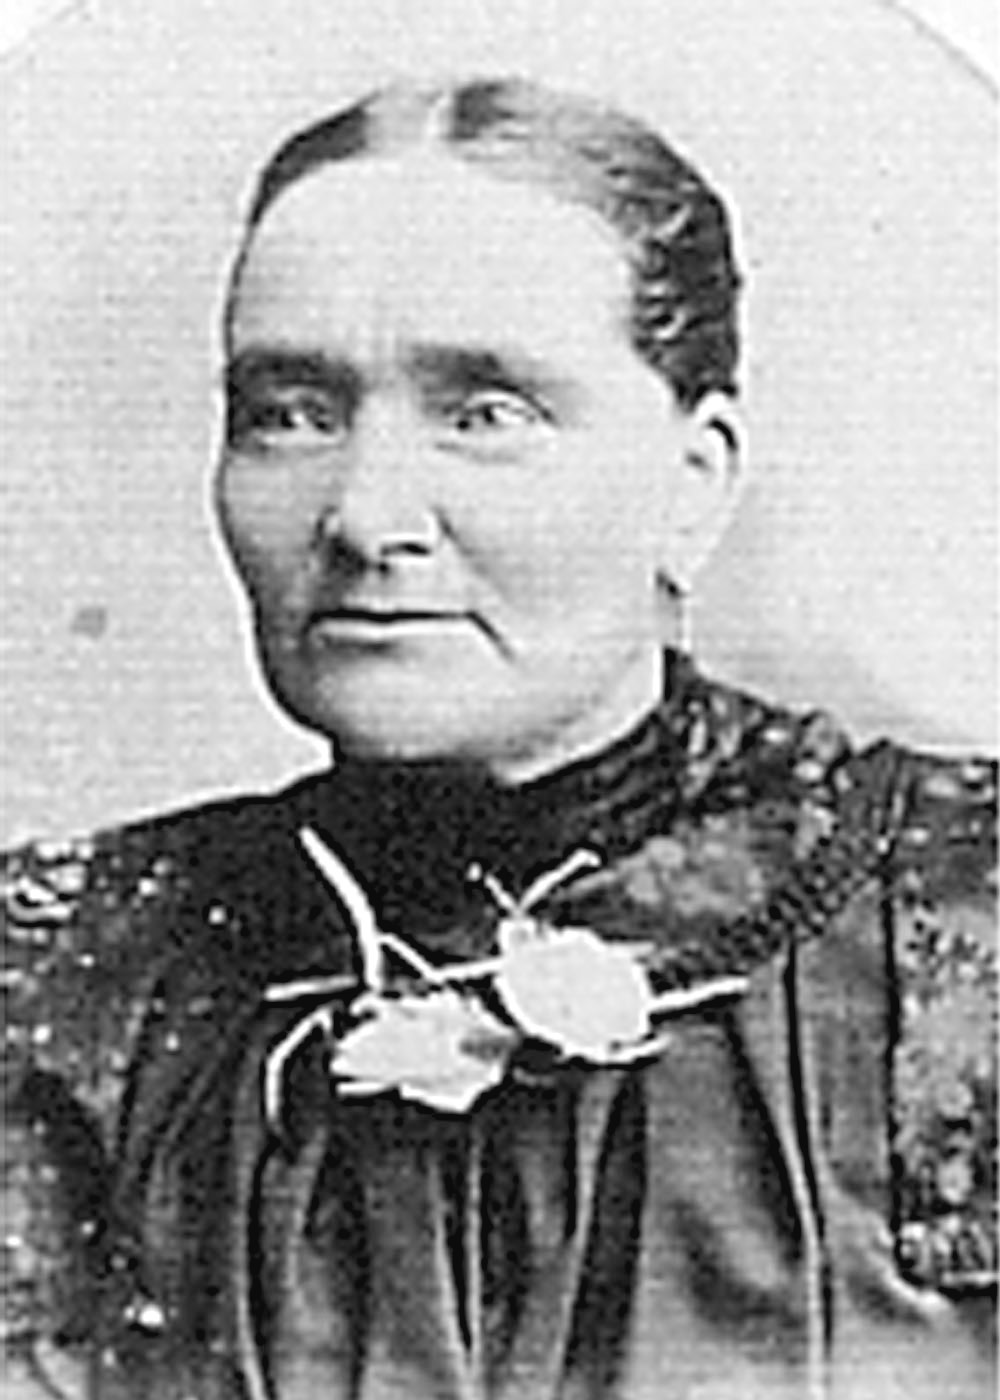 Halldóra Árnadóttir was introduced to Mormonism  by LofturJónsson, and they later married in 1874.  Courtesy of the Icelandic Association of Utah